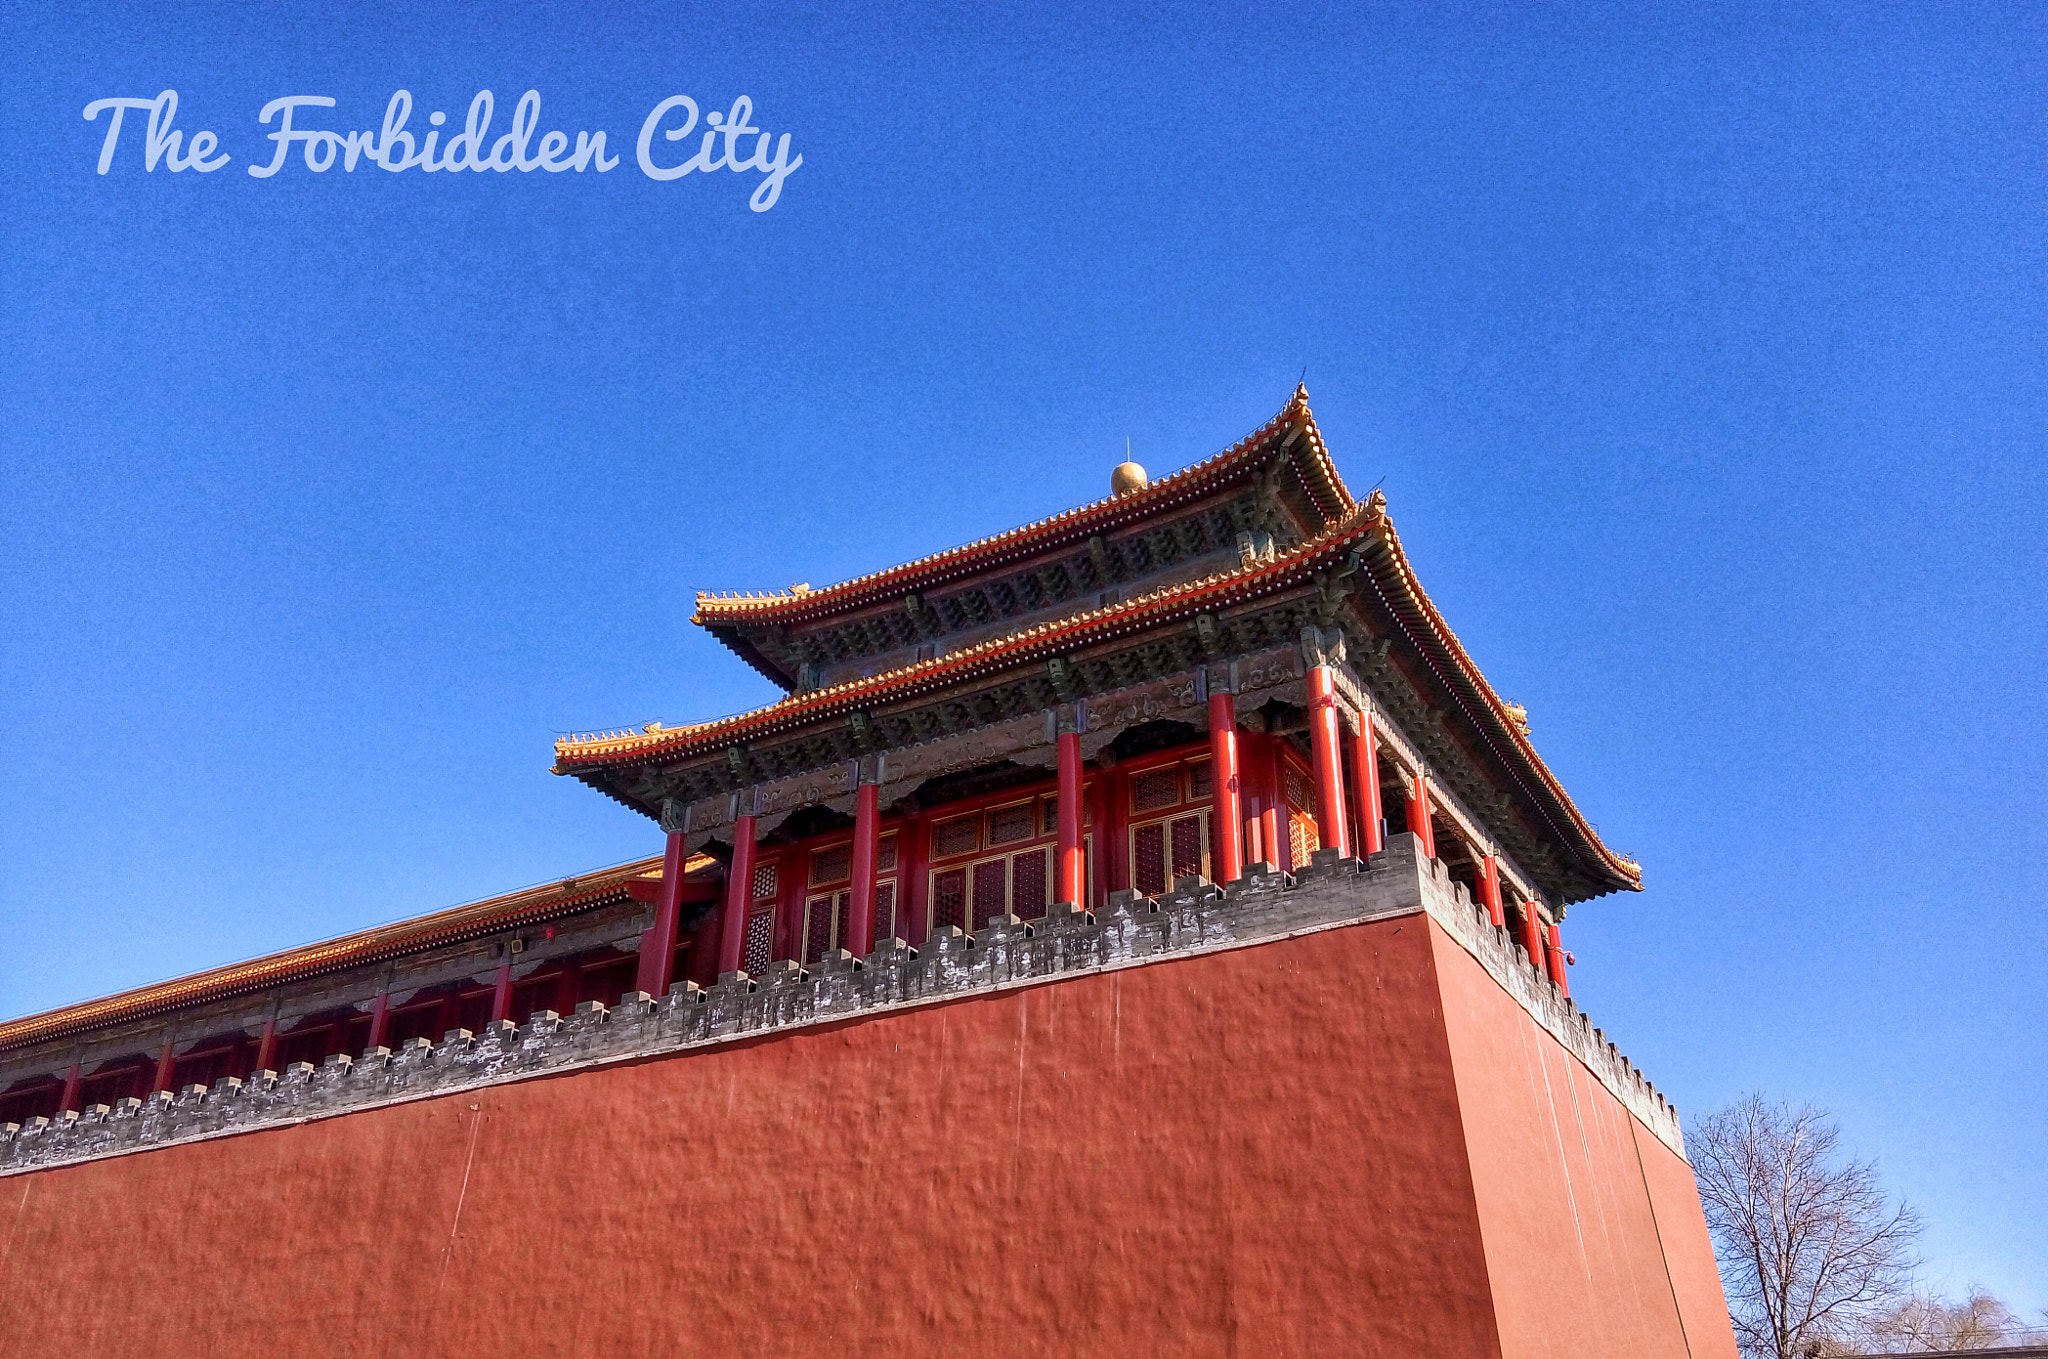 Meizu m1 note sample photo. The forbidden city photography